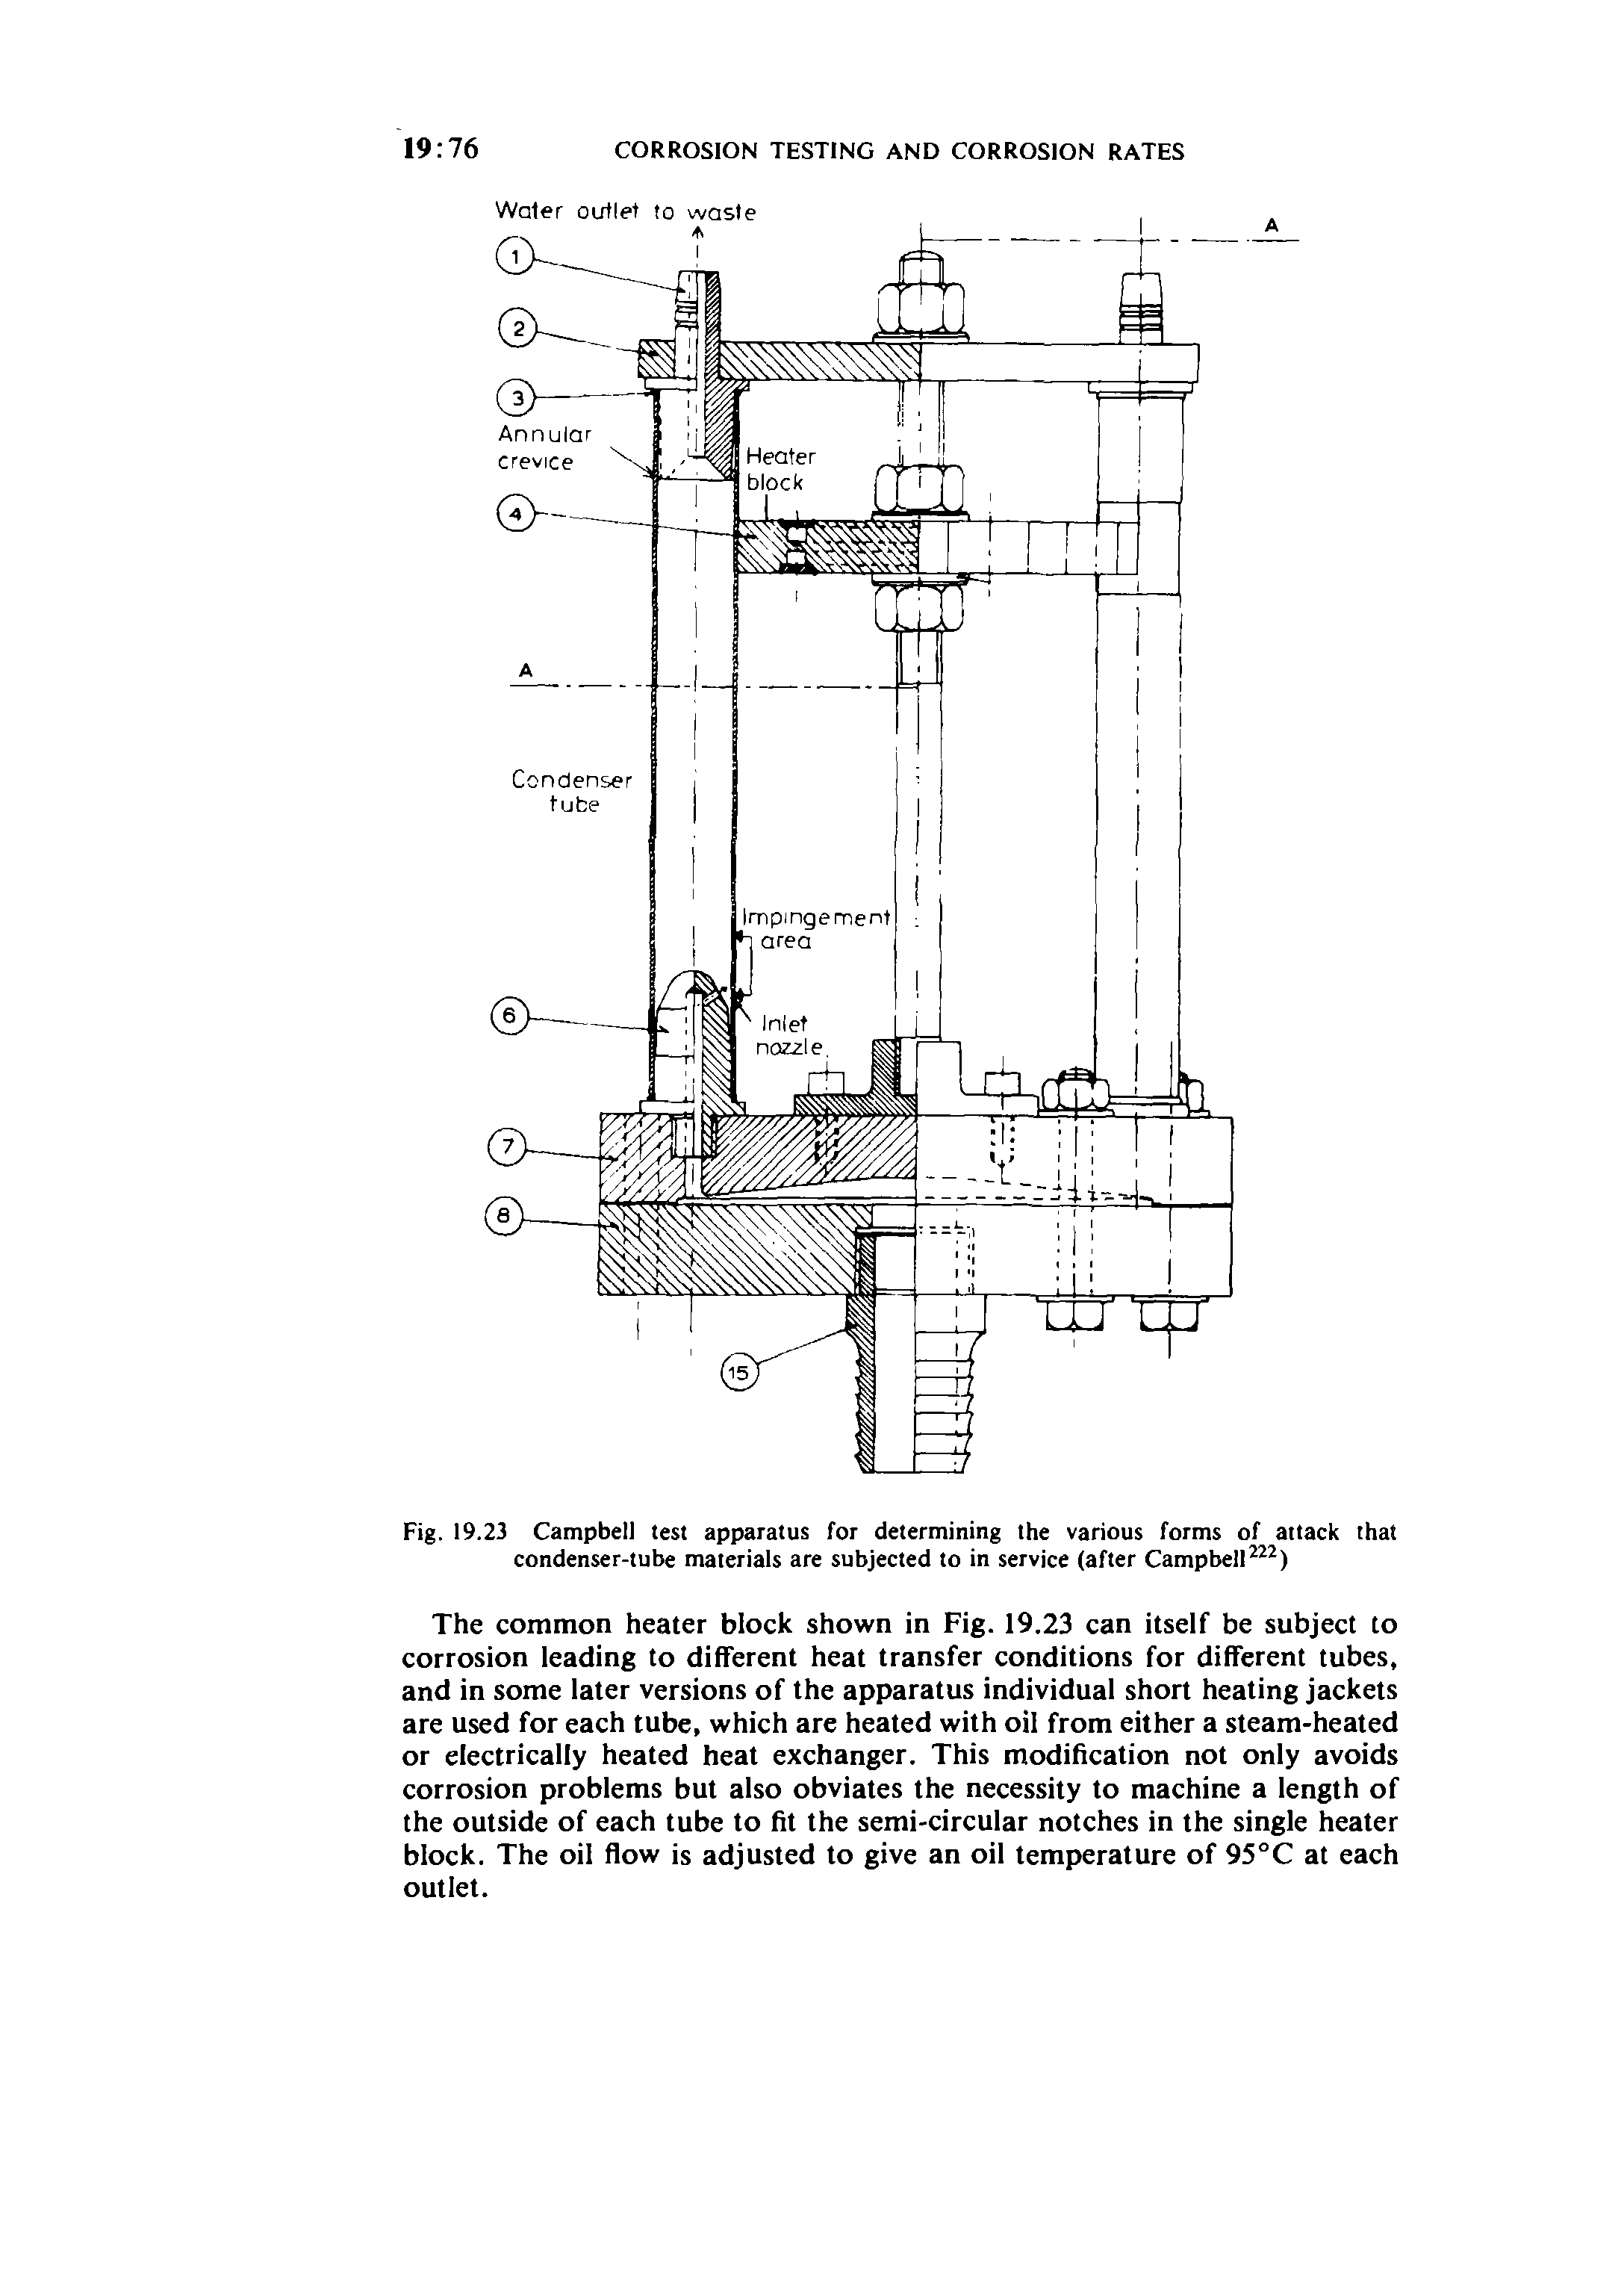 Fig. 19.23 Campbell test apparatus for determining the various forms of attack that condenser-tube materials are subjected to in service (after Campbell...